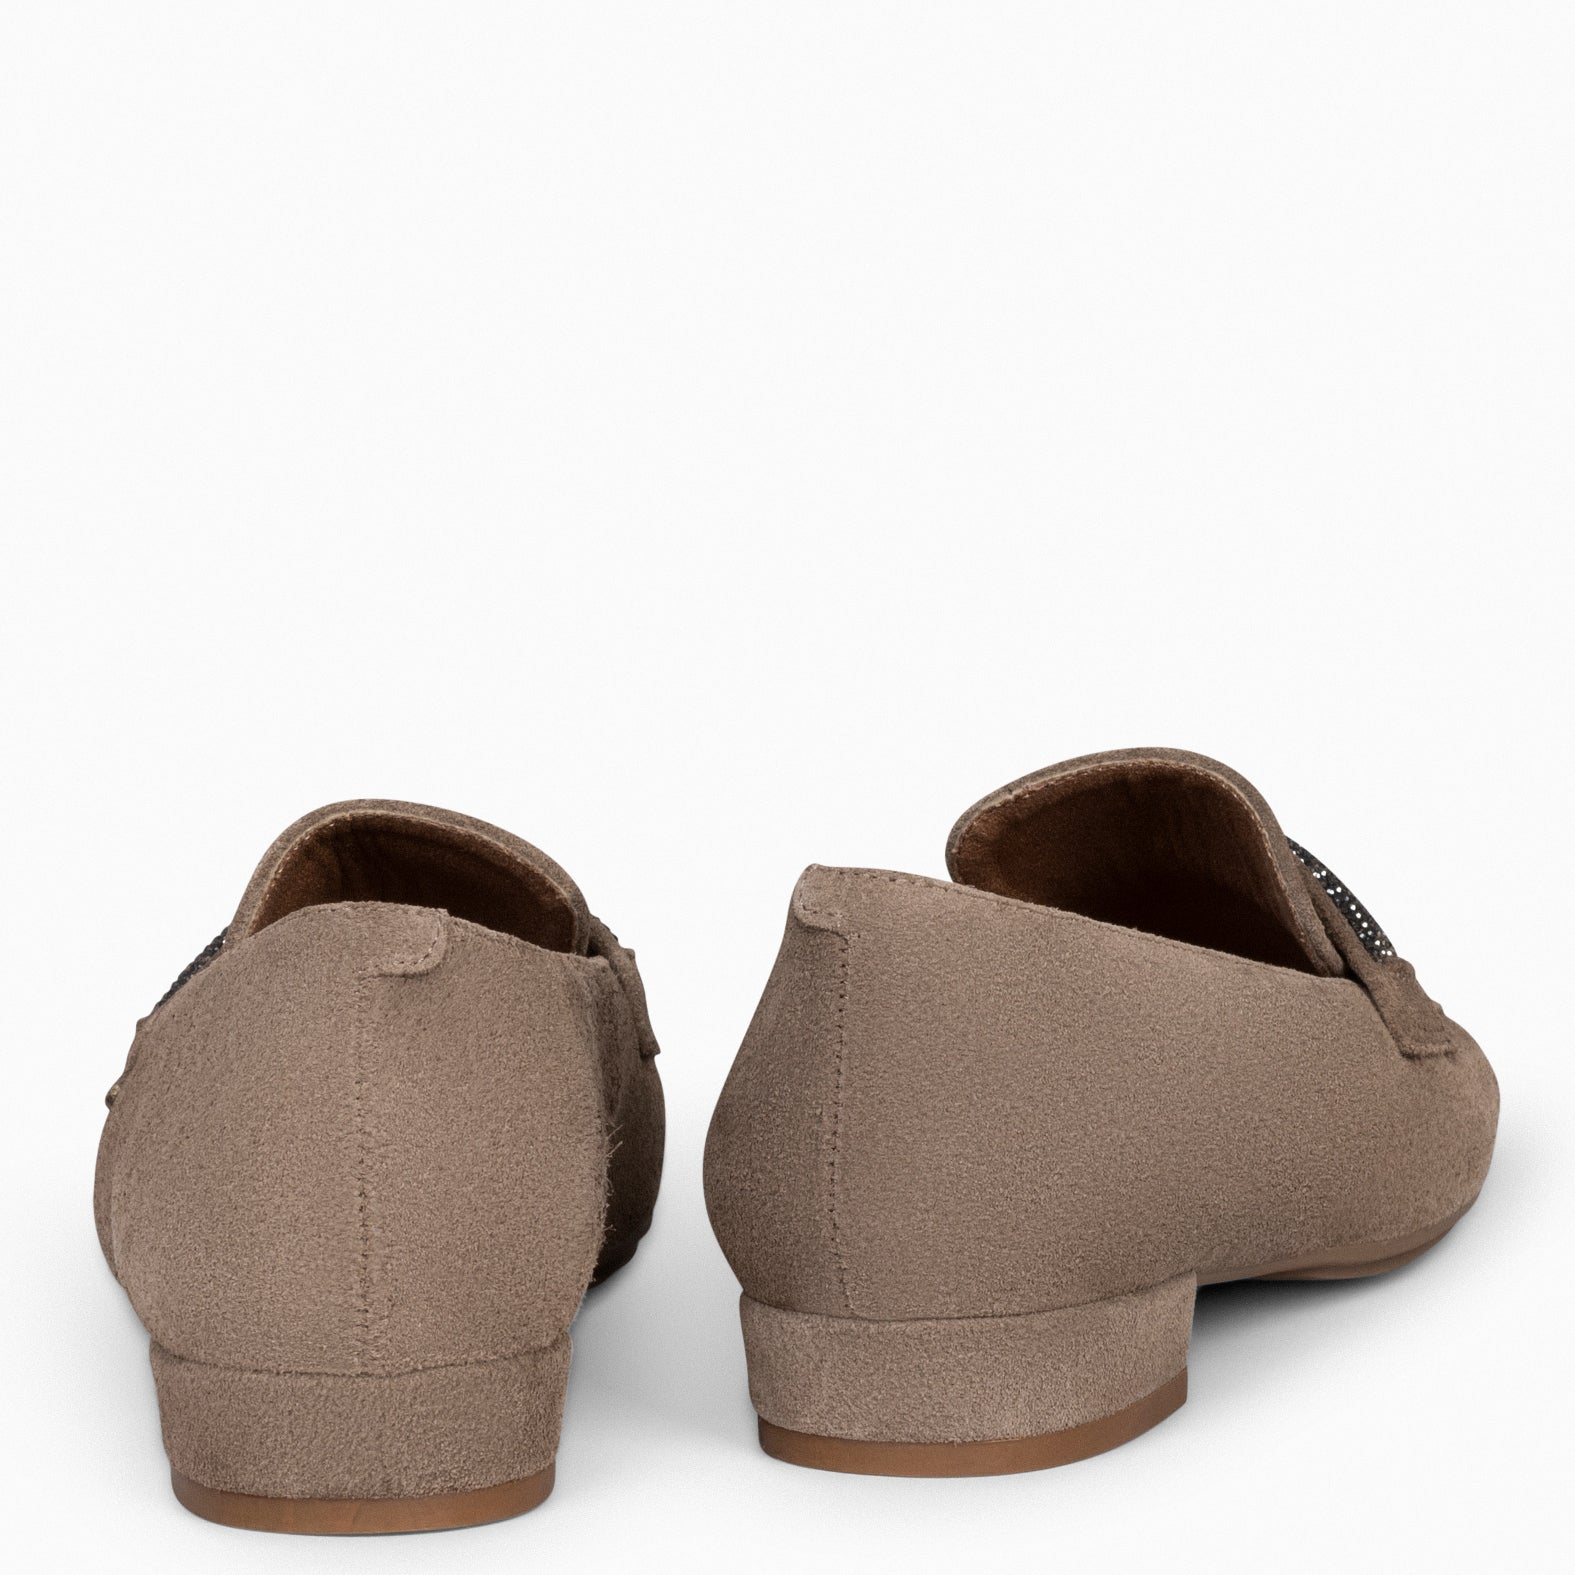 SLIPPERS BRIGHT - Chaussures plates TAUPE